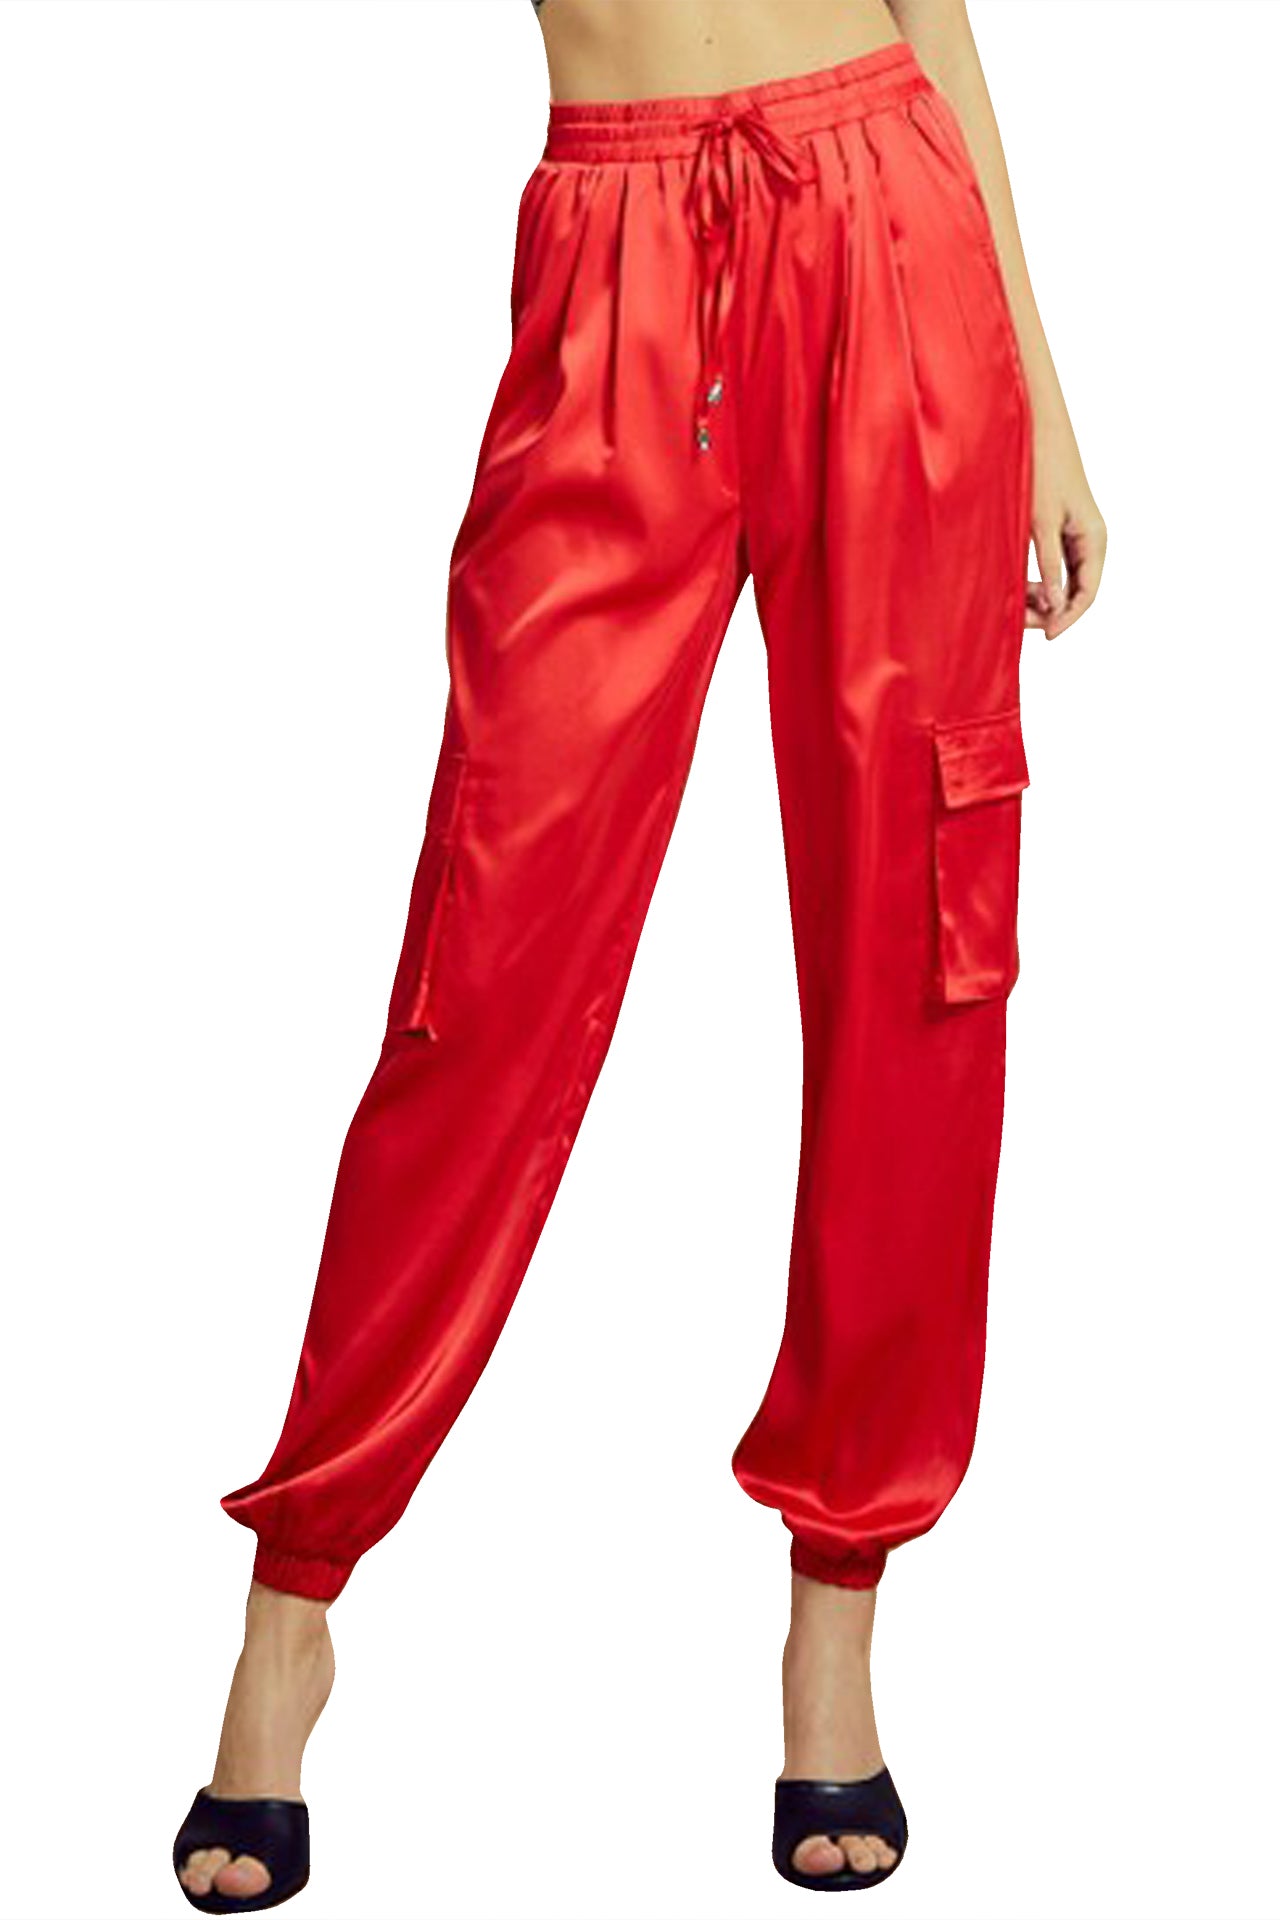 Red Jogger pants